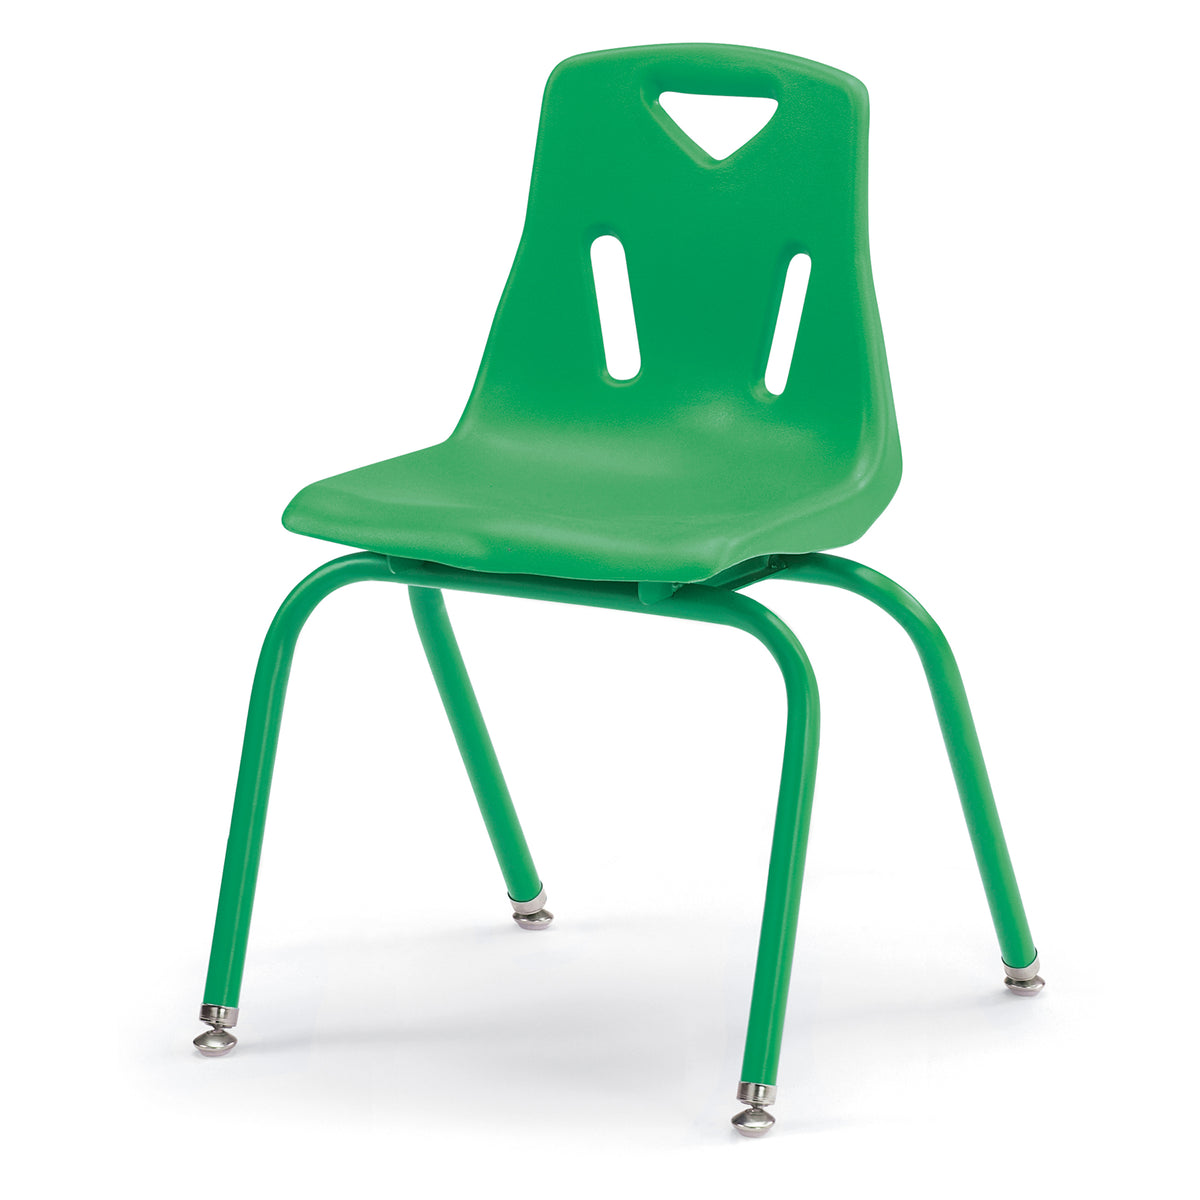 8126JC1119, Berries Stacking Chair with Powder-Coated Legs - 16" Ht - Green